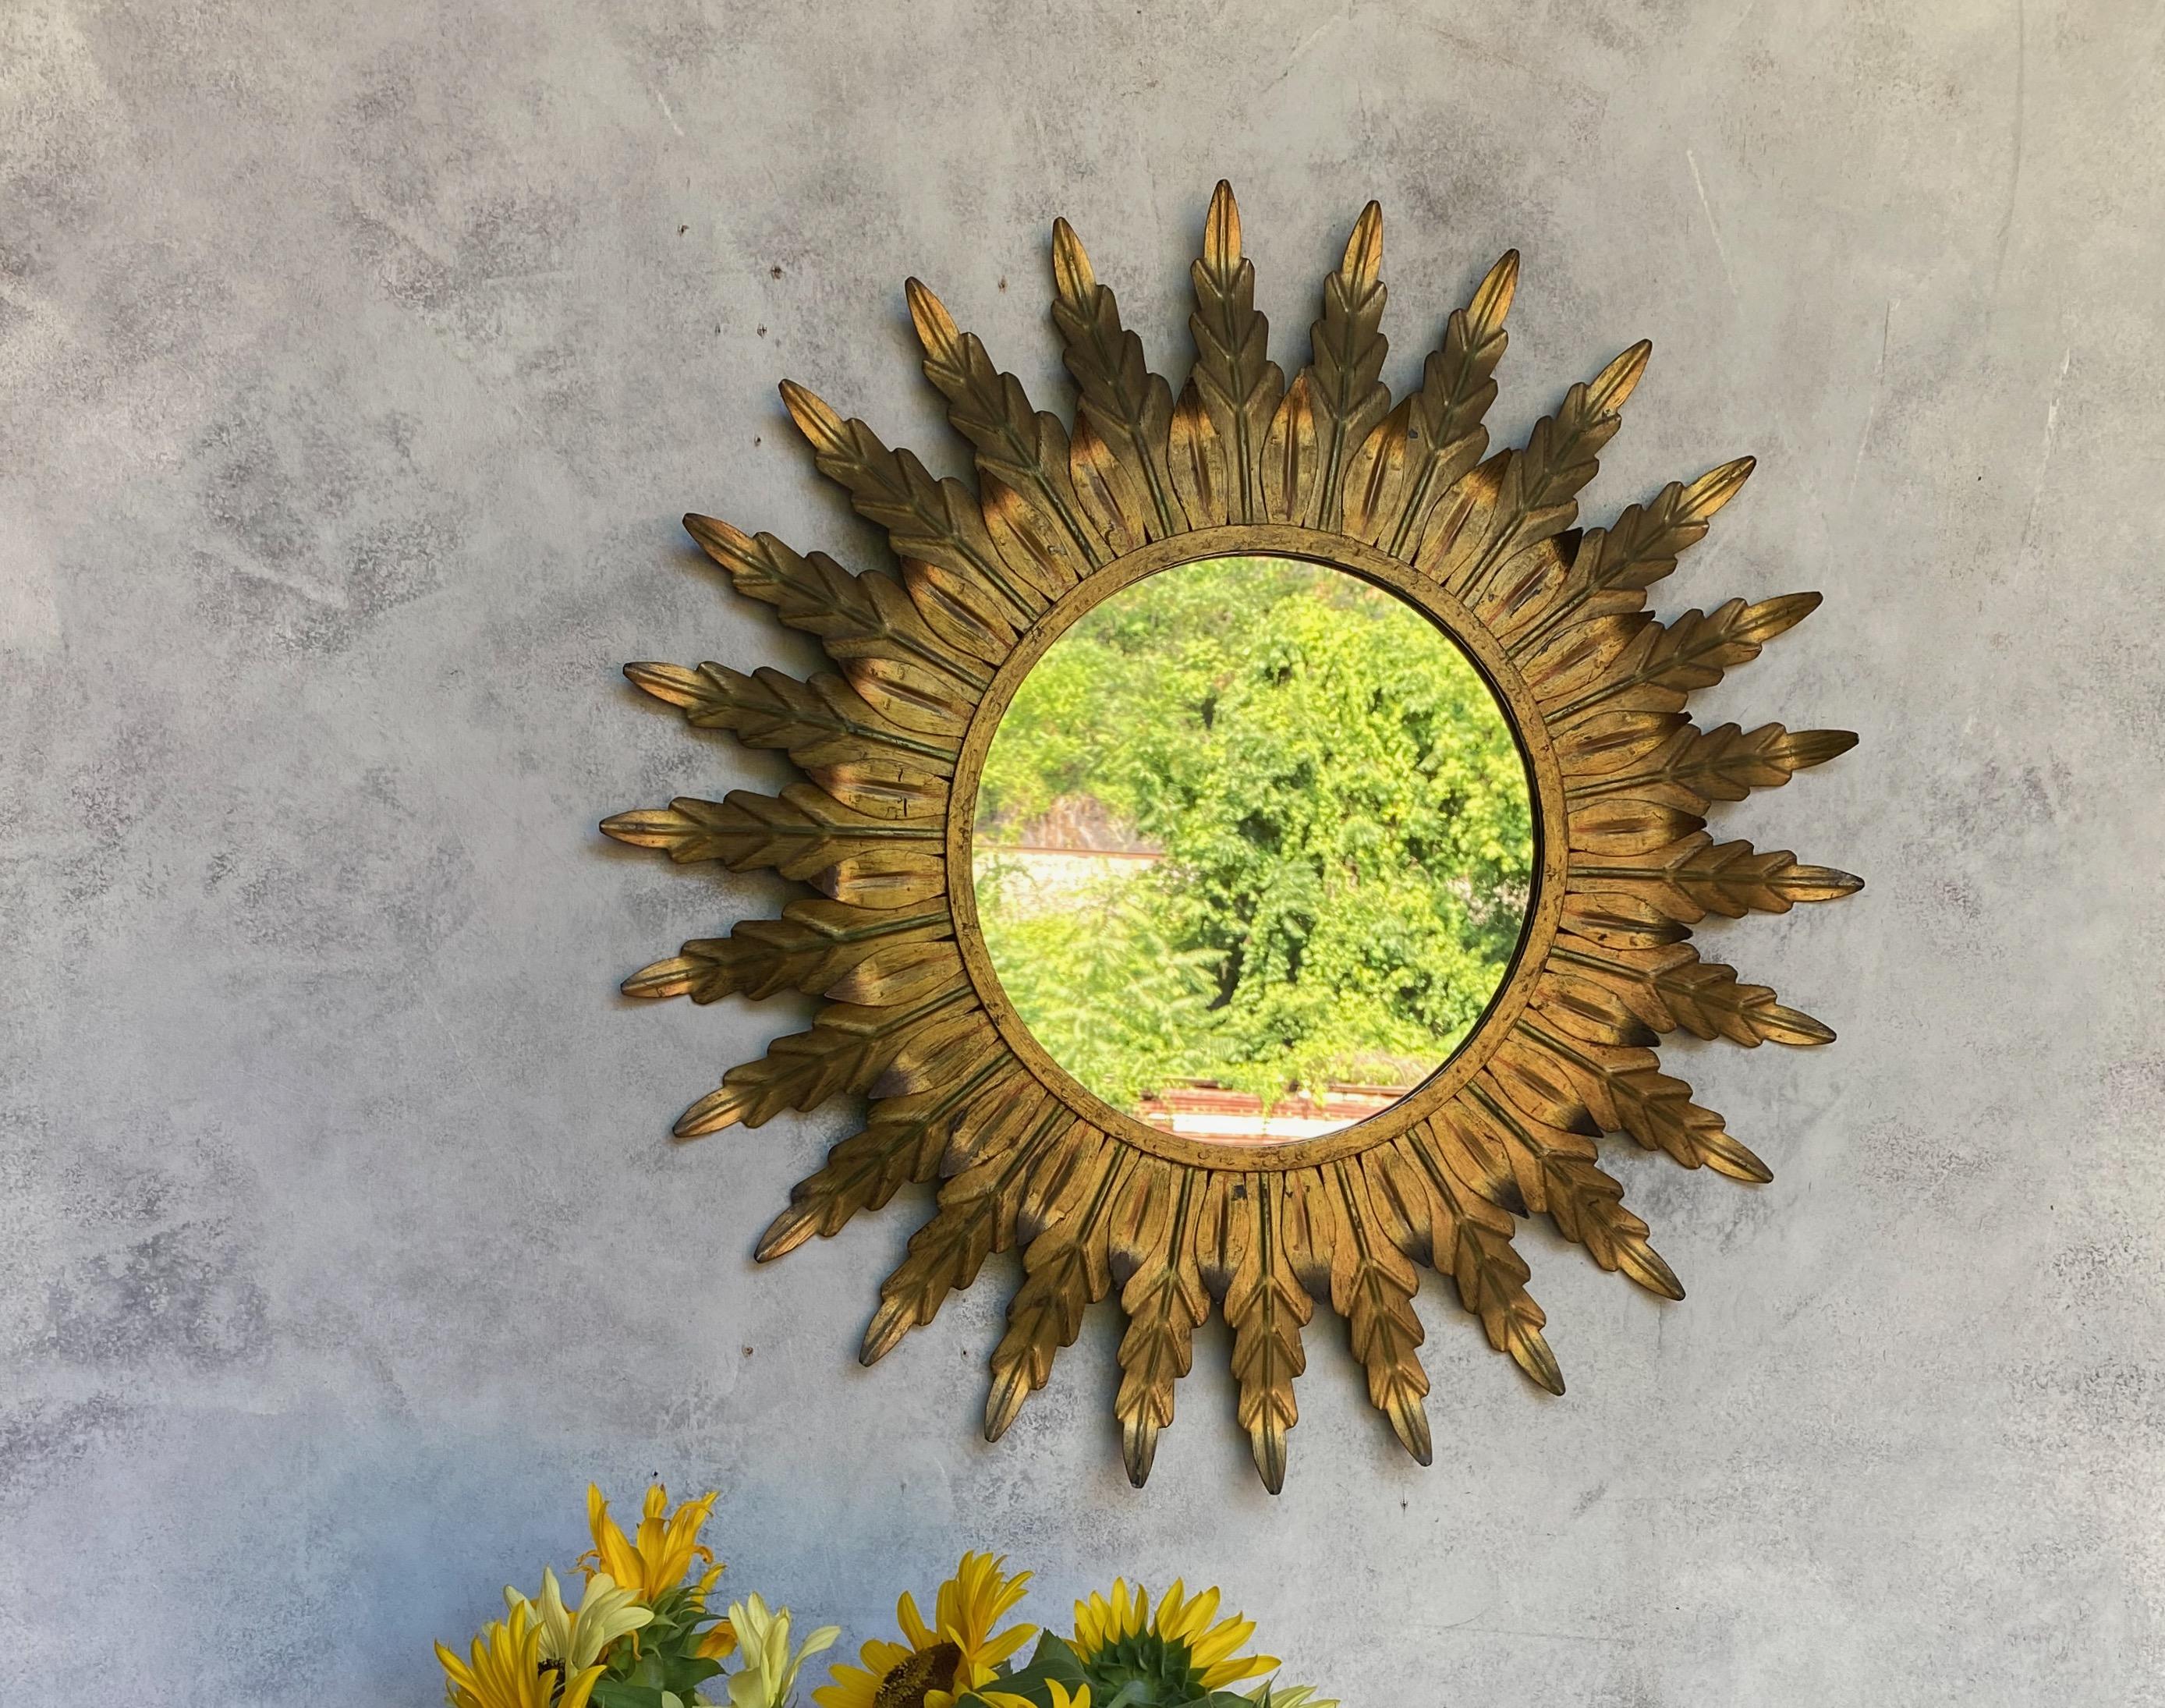 Art Nouveau Gilt Metal Sunburst Mirror with Radiating Leaves and Traces of Green Hues